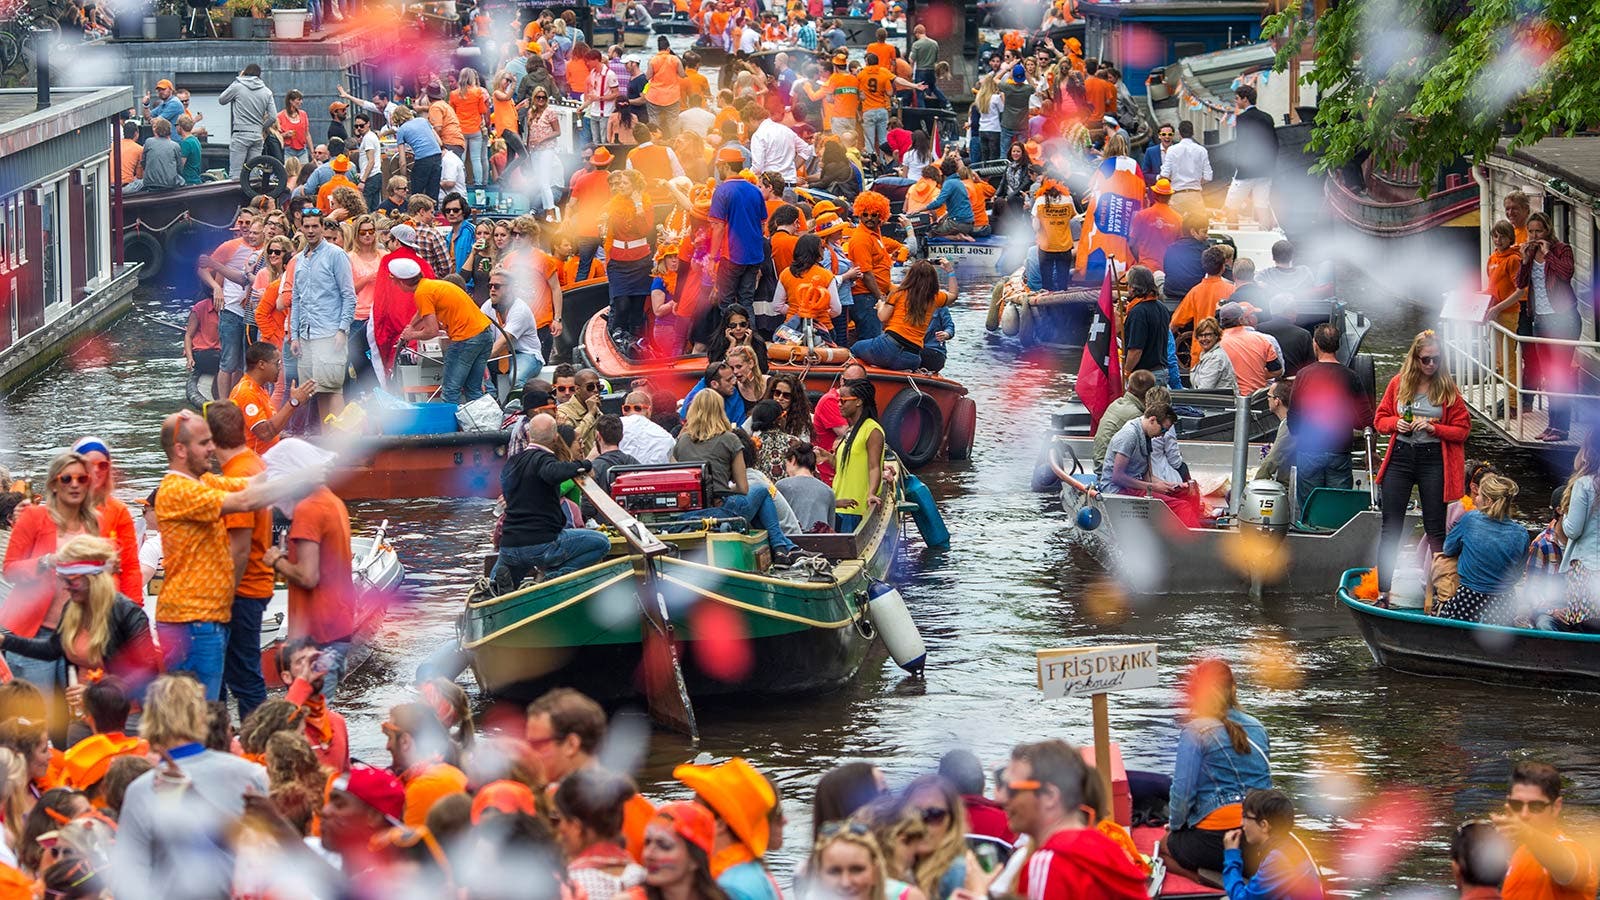 King's Day is celebrated every year on 27 April